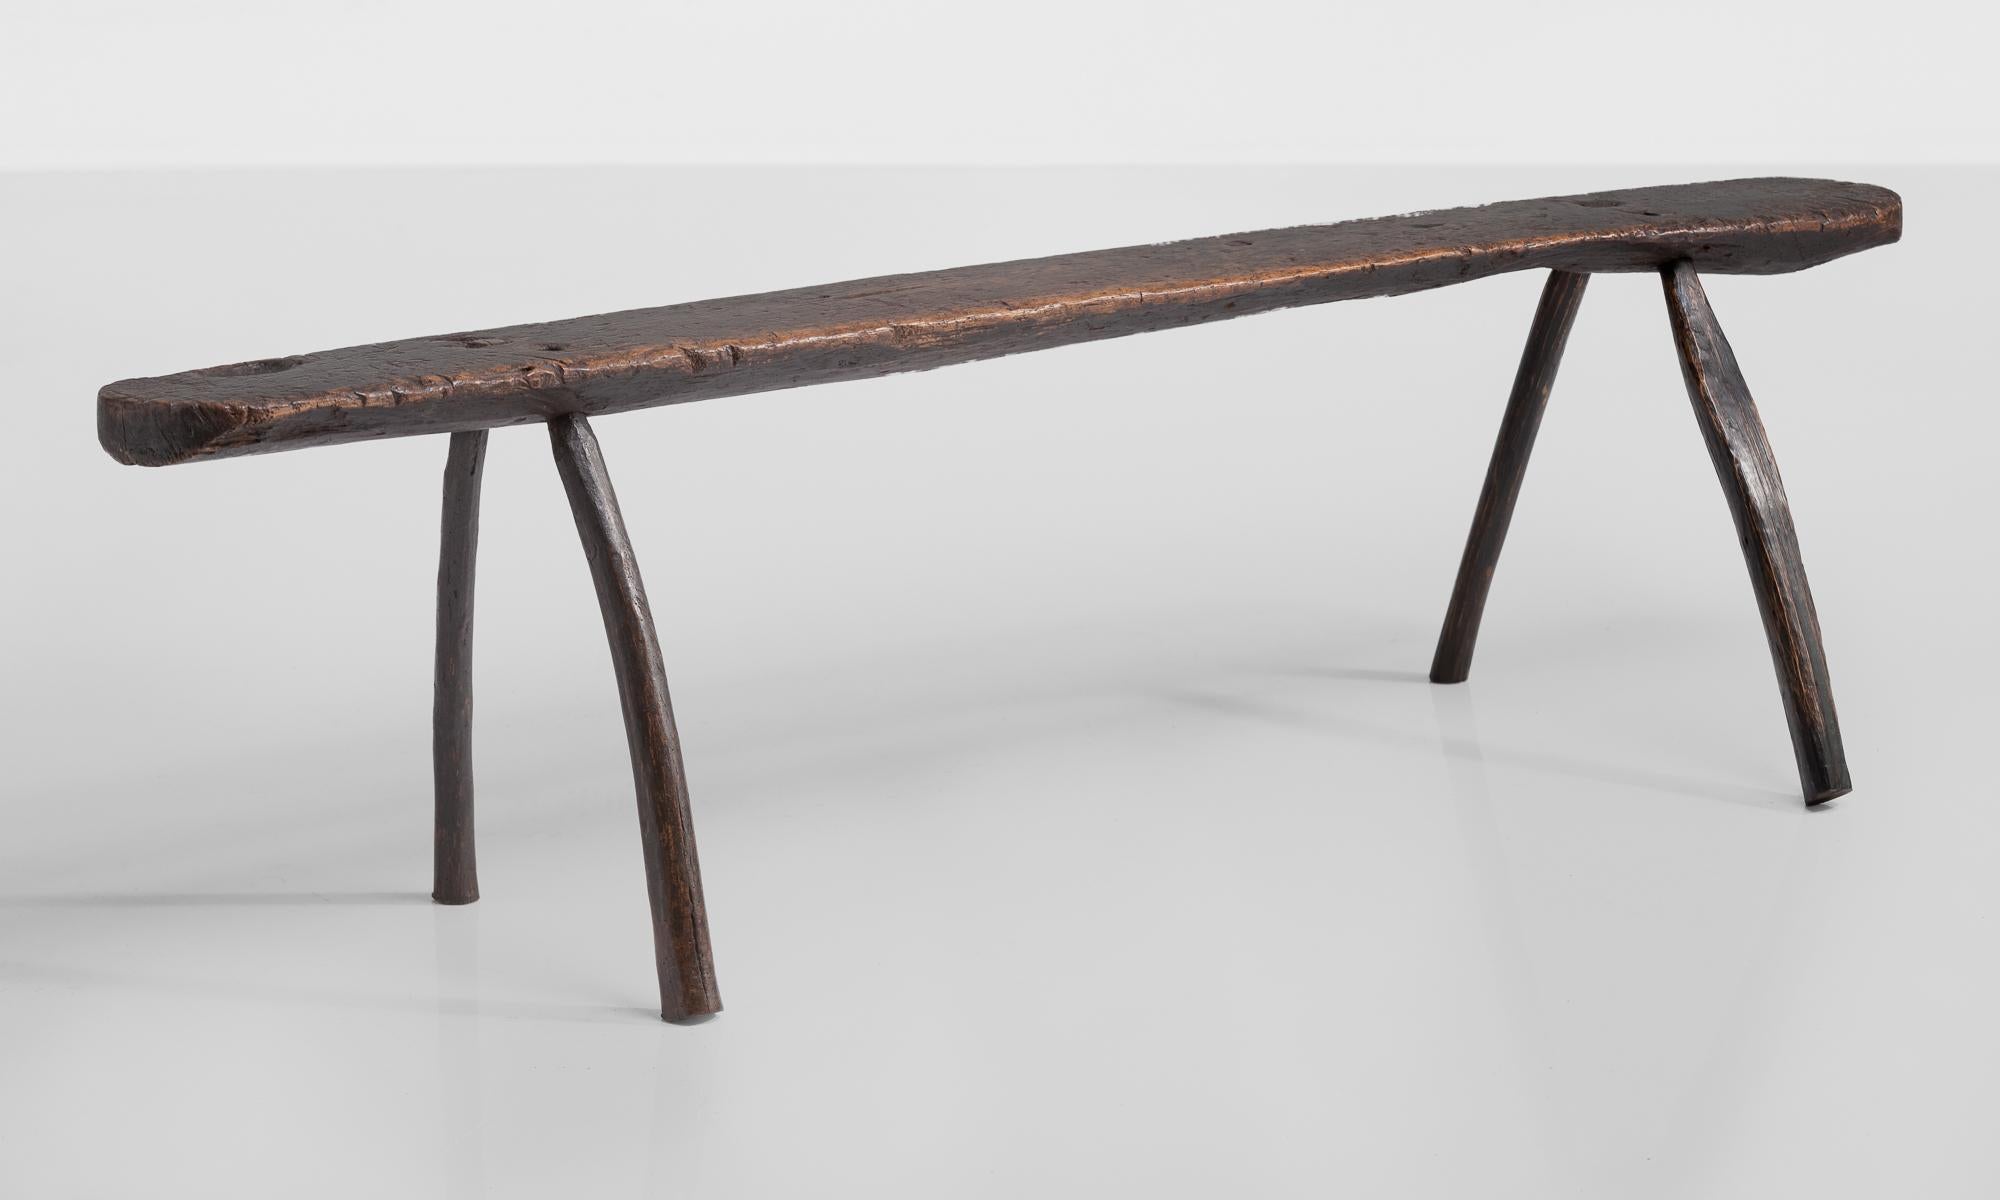 Primitive sculptural bench, England, circa 1790.

Rustic form with curved legs and a seat that measures 8